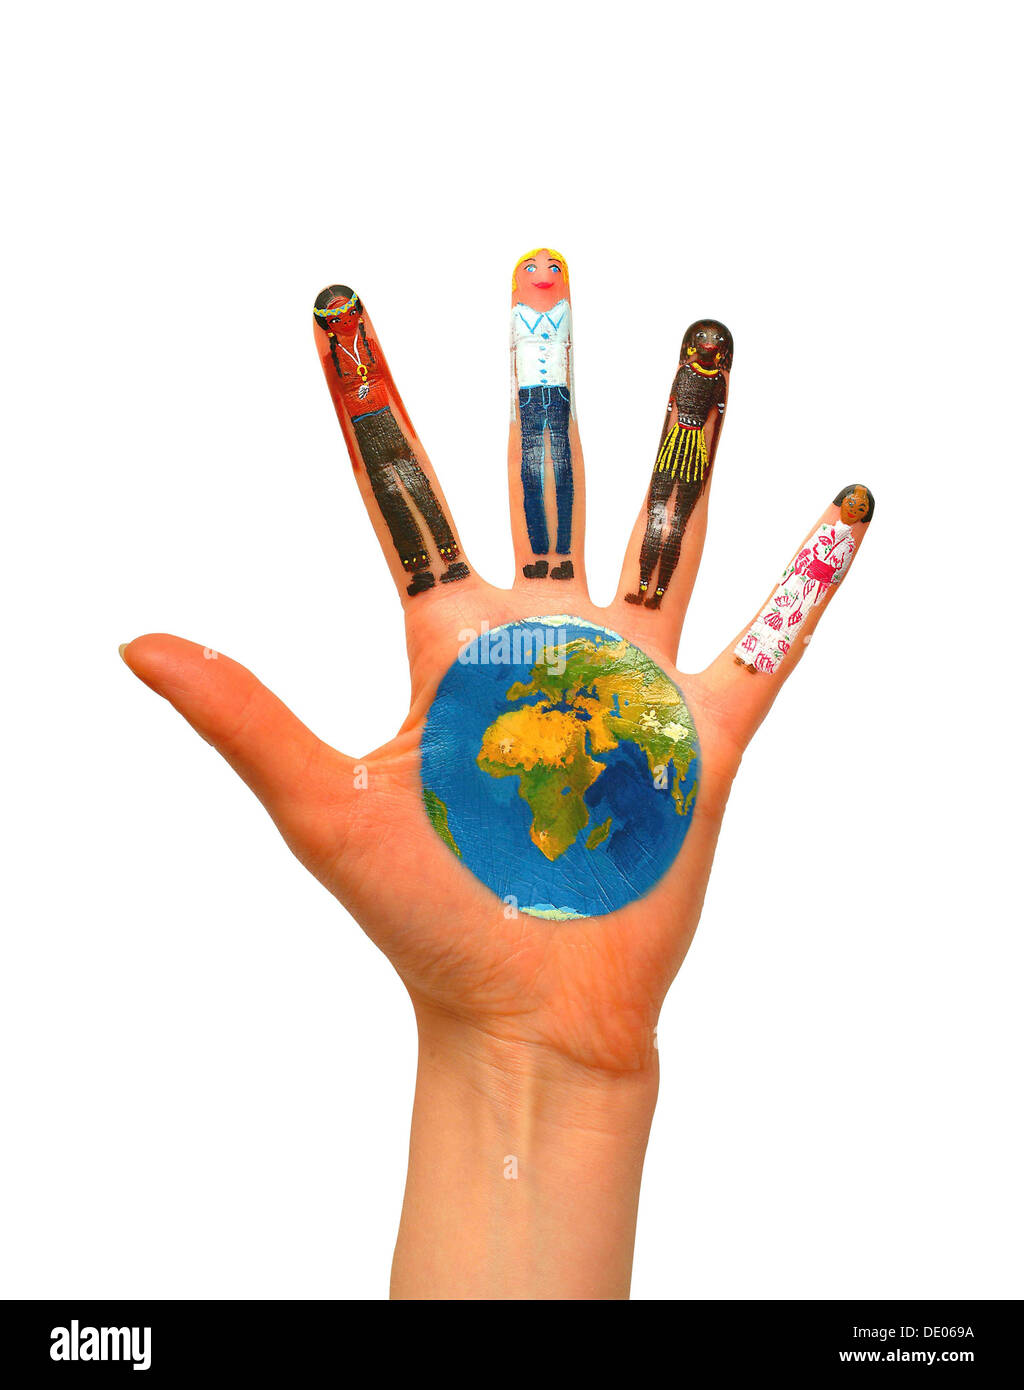 Different nationalities, a Native American, an European, an African, an Asian and the earth painted on a hand Stock Photo